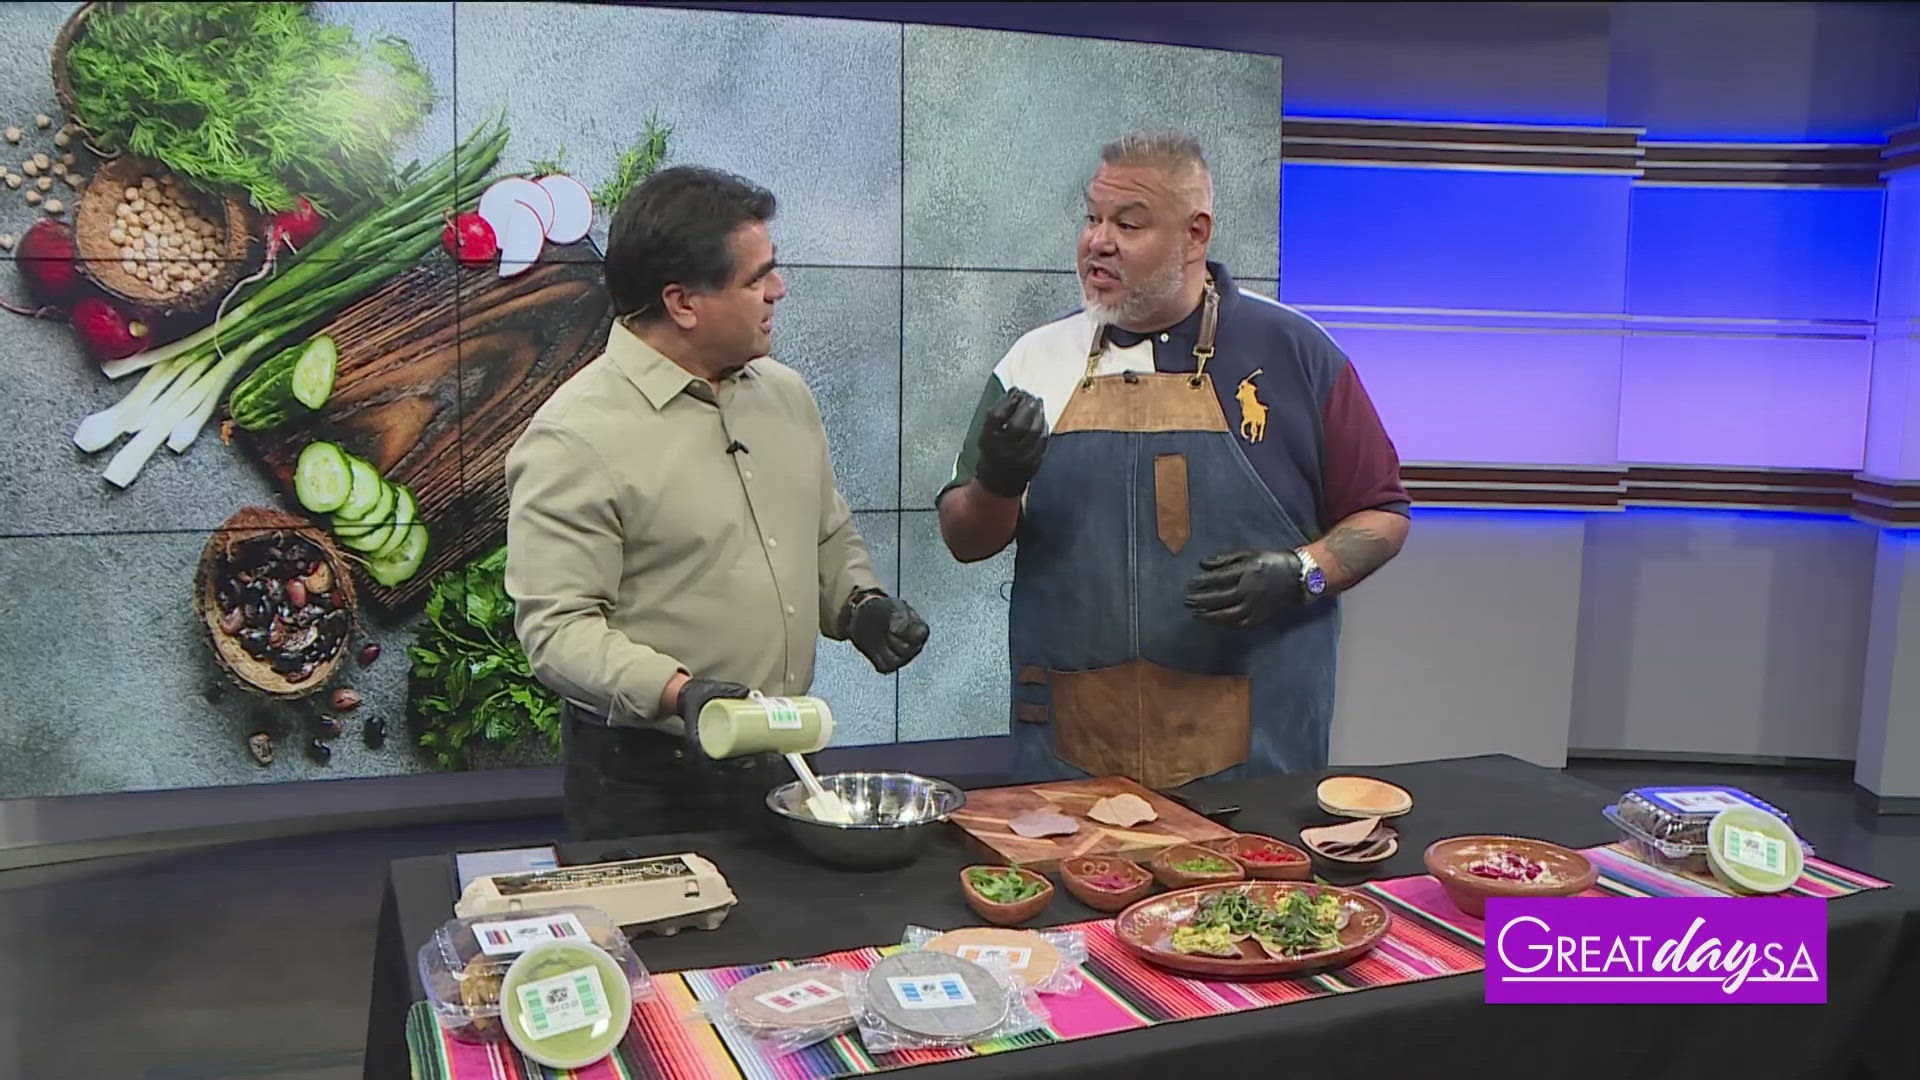 Paul helps whip up some elevated Mexican food with Paul Morales of Ancient Heirloom Grains.